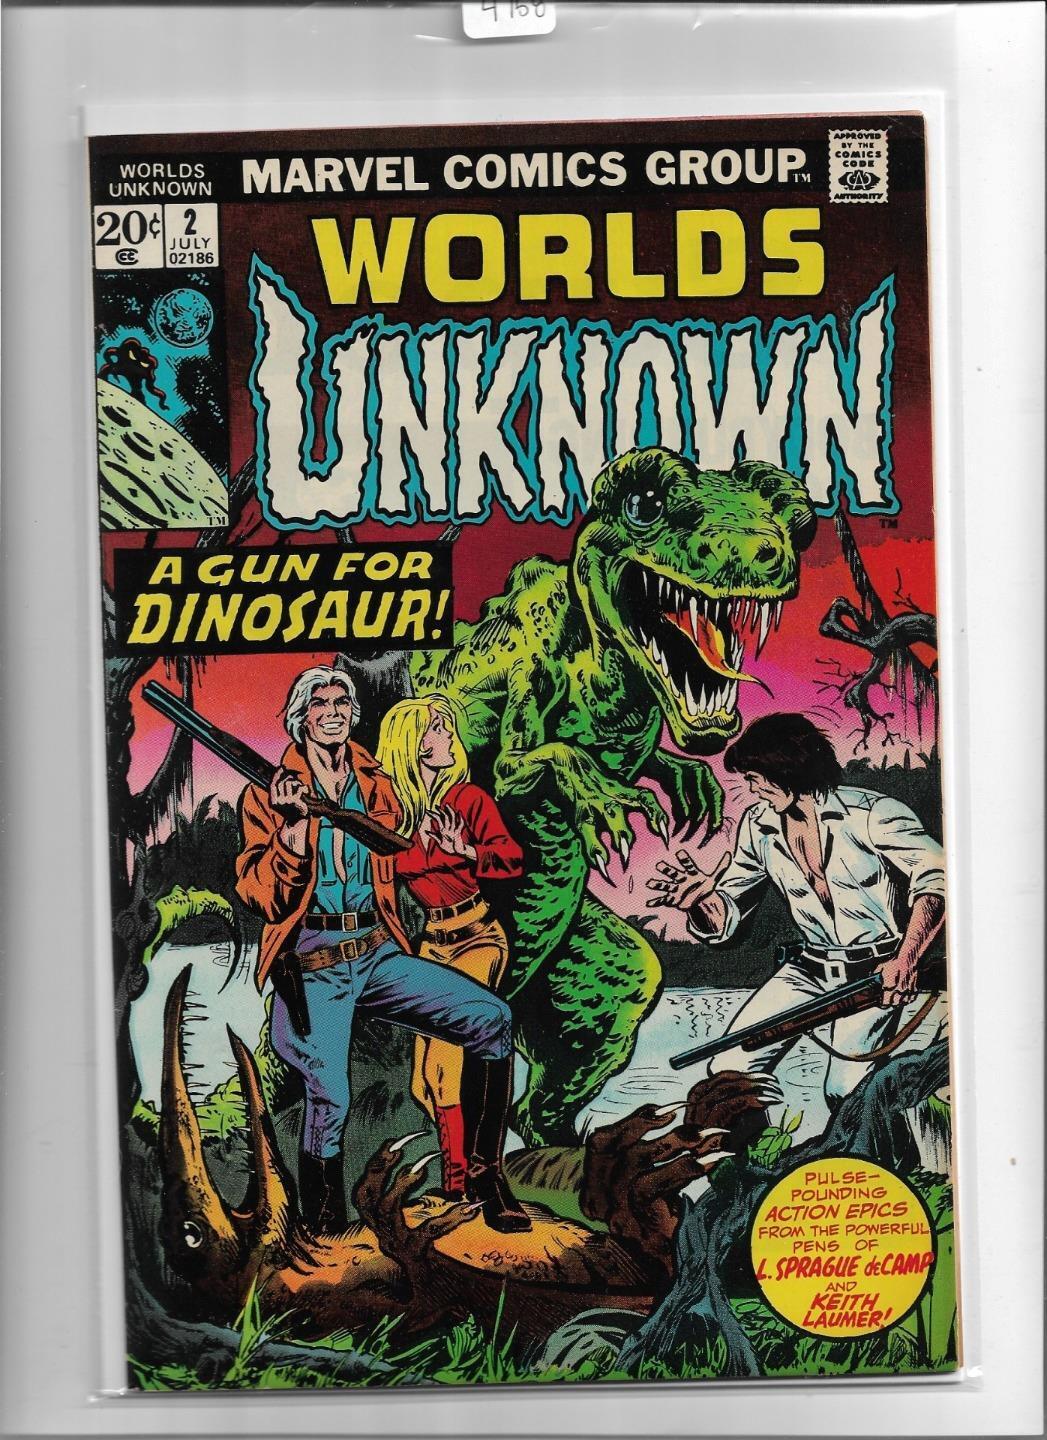 WORLDS UNKNOWN #2 1973 VERY FINE+ 8.5 4758 cover tanning